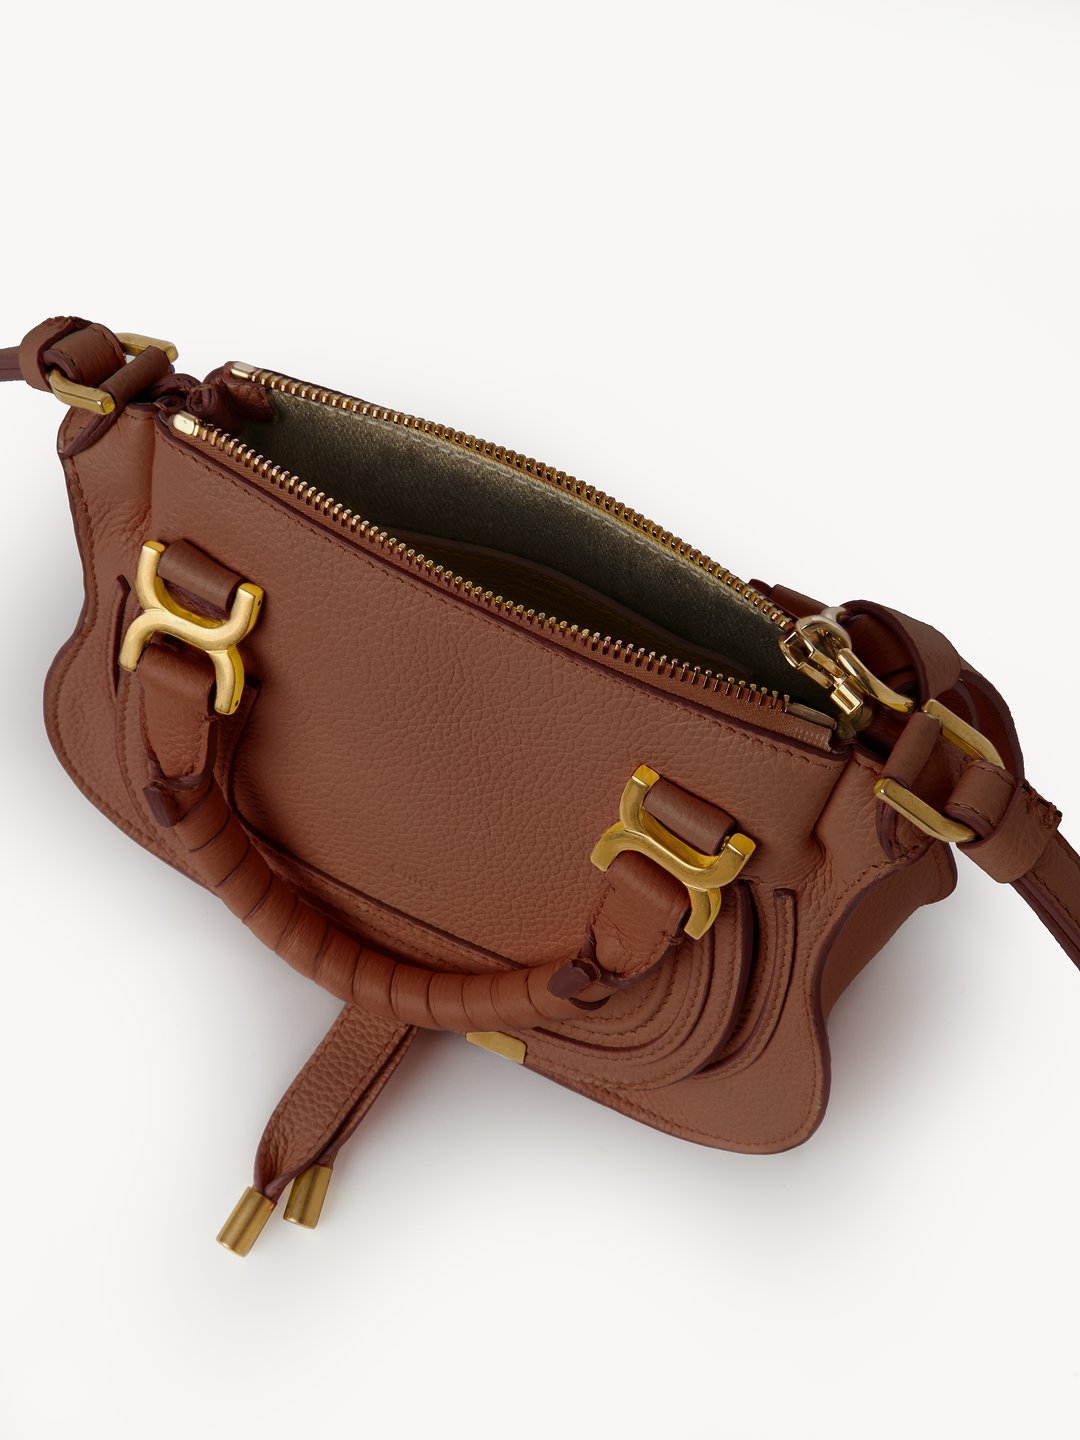 CHLOÉ Marcie Mini Double Carry Bag in Tan | The New Trend